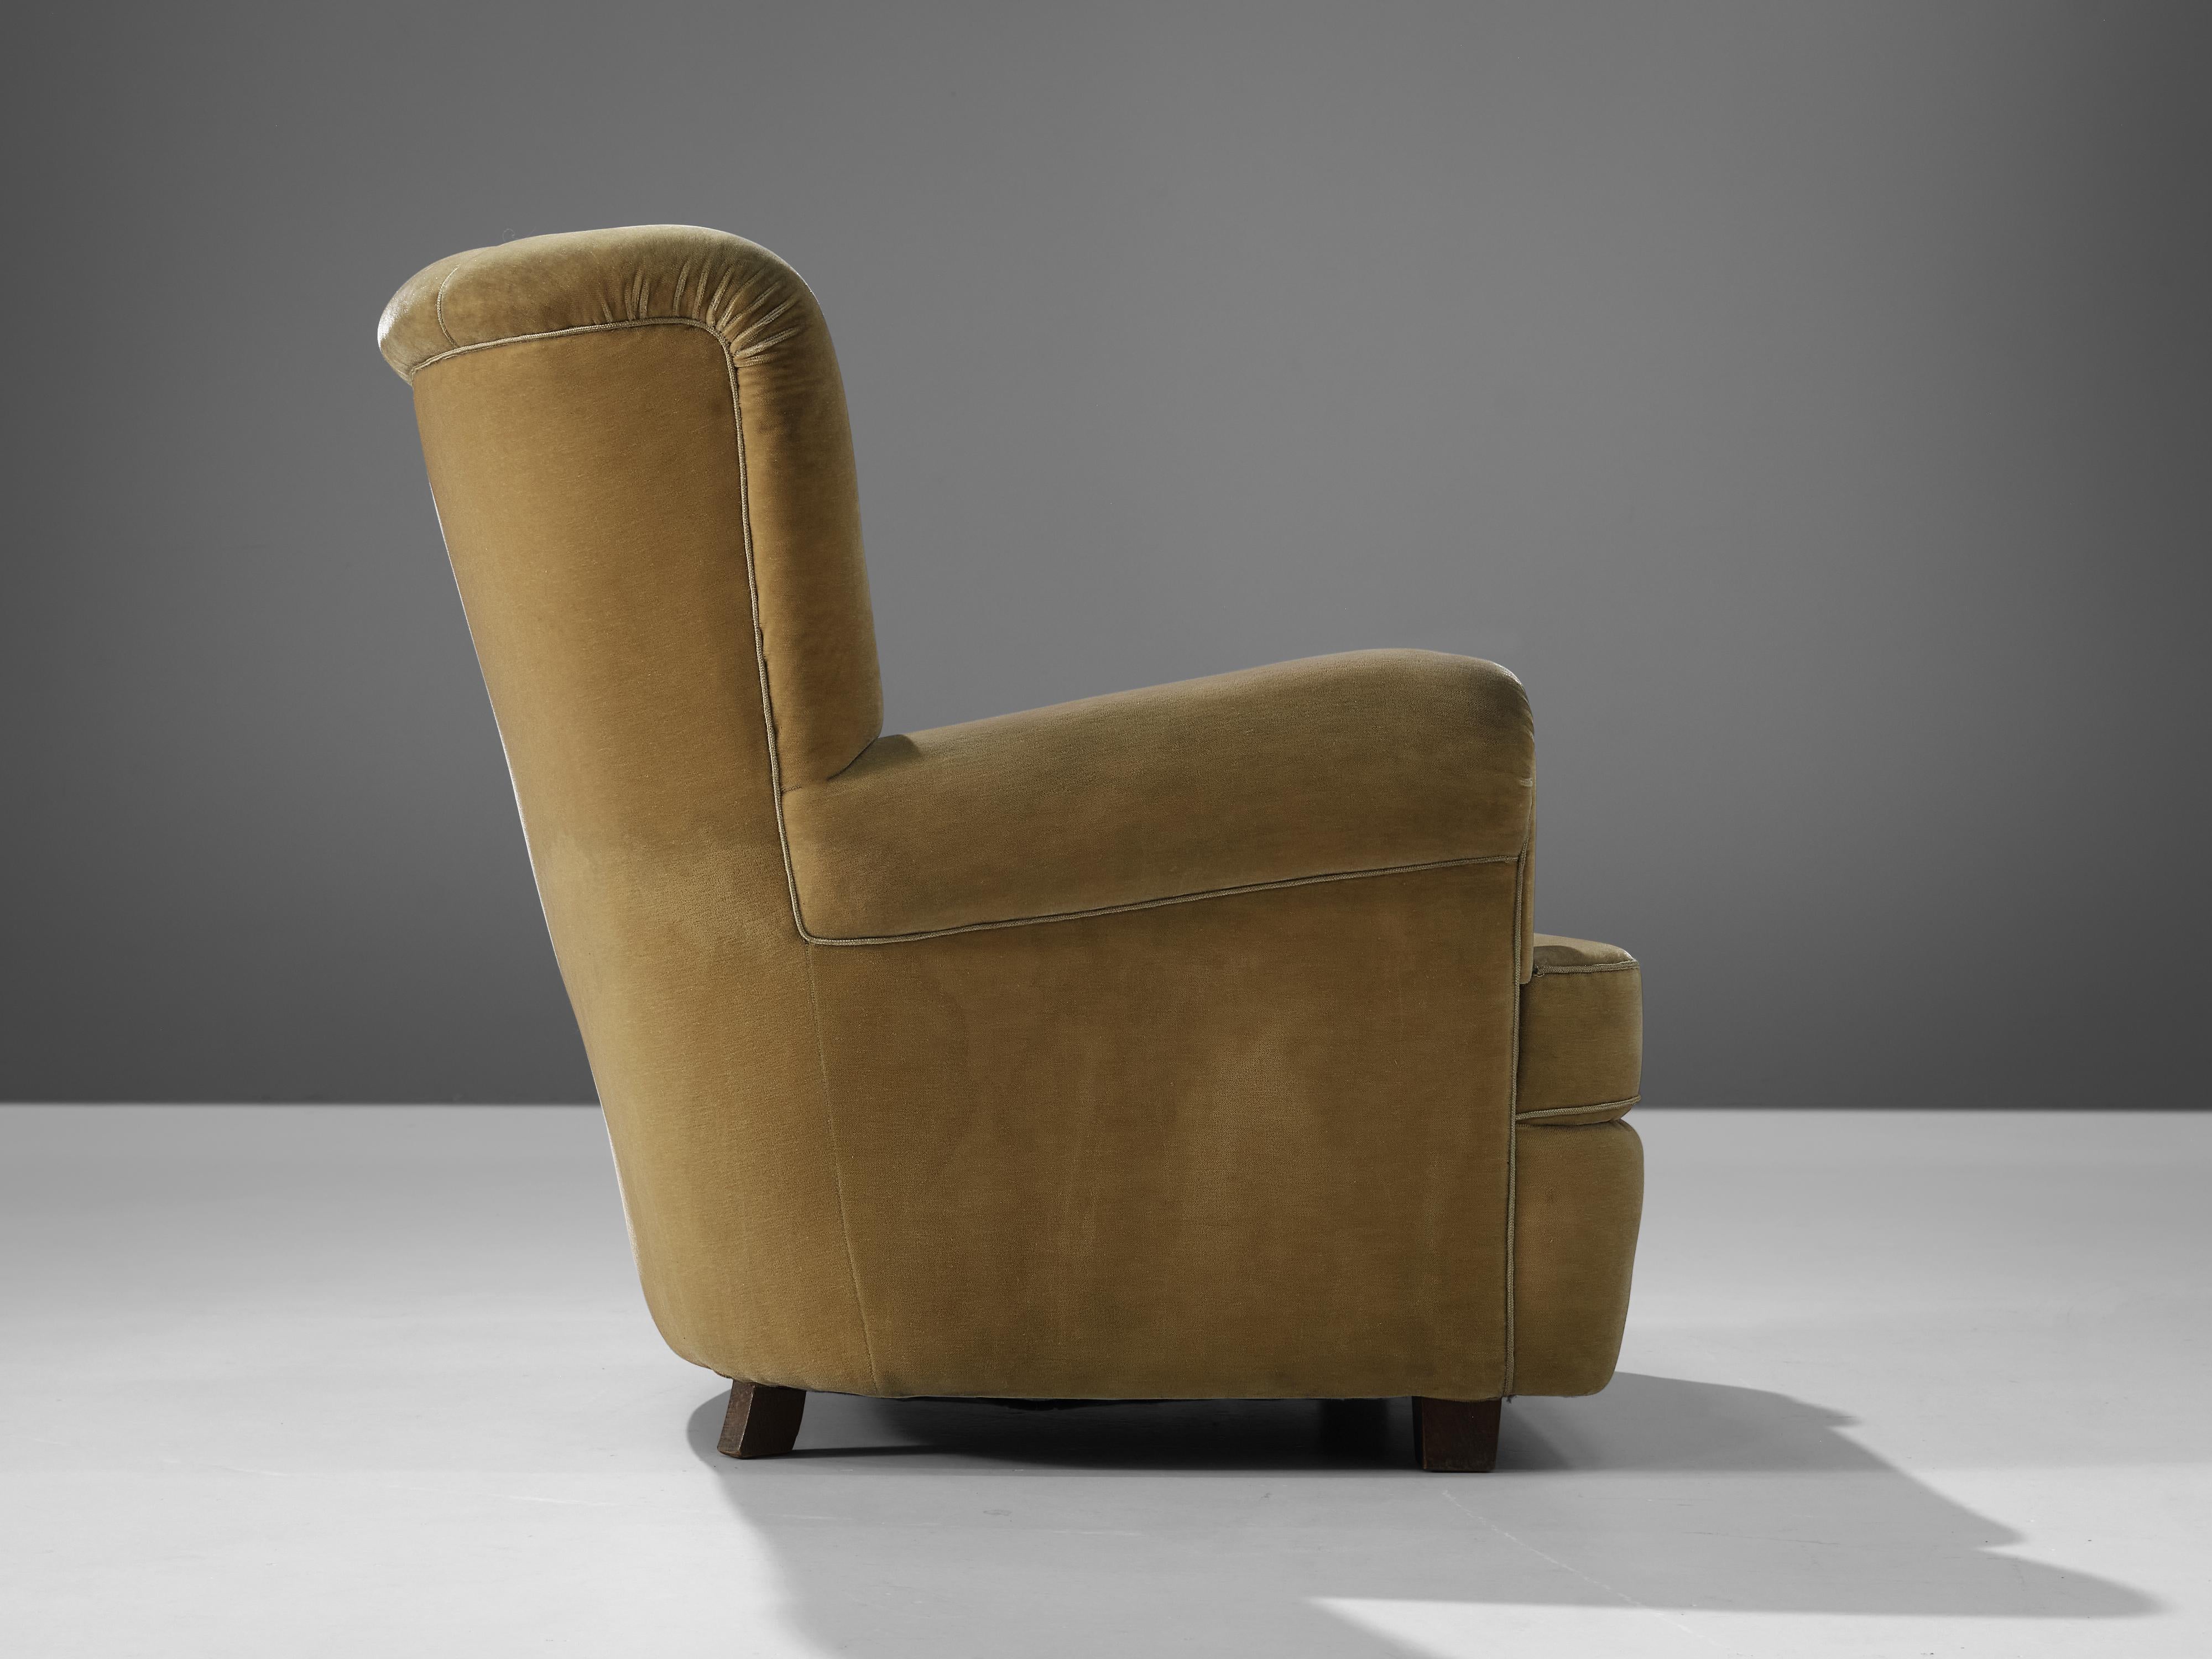 Bulky Danish Lounge Chair in Mustard Fabric In Good Condition For Sale In Waalwijk, NL